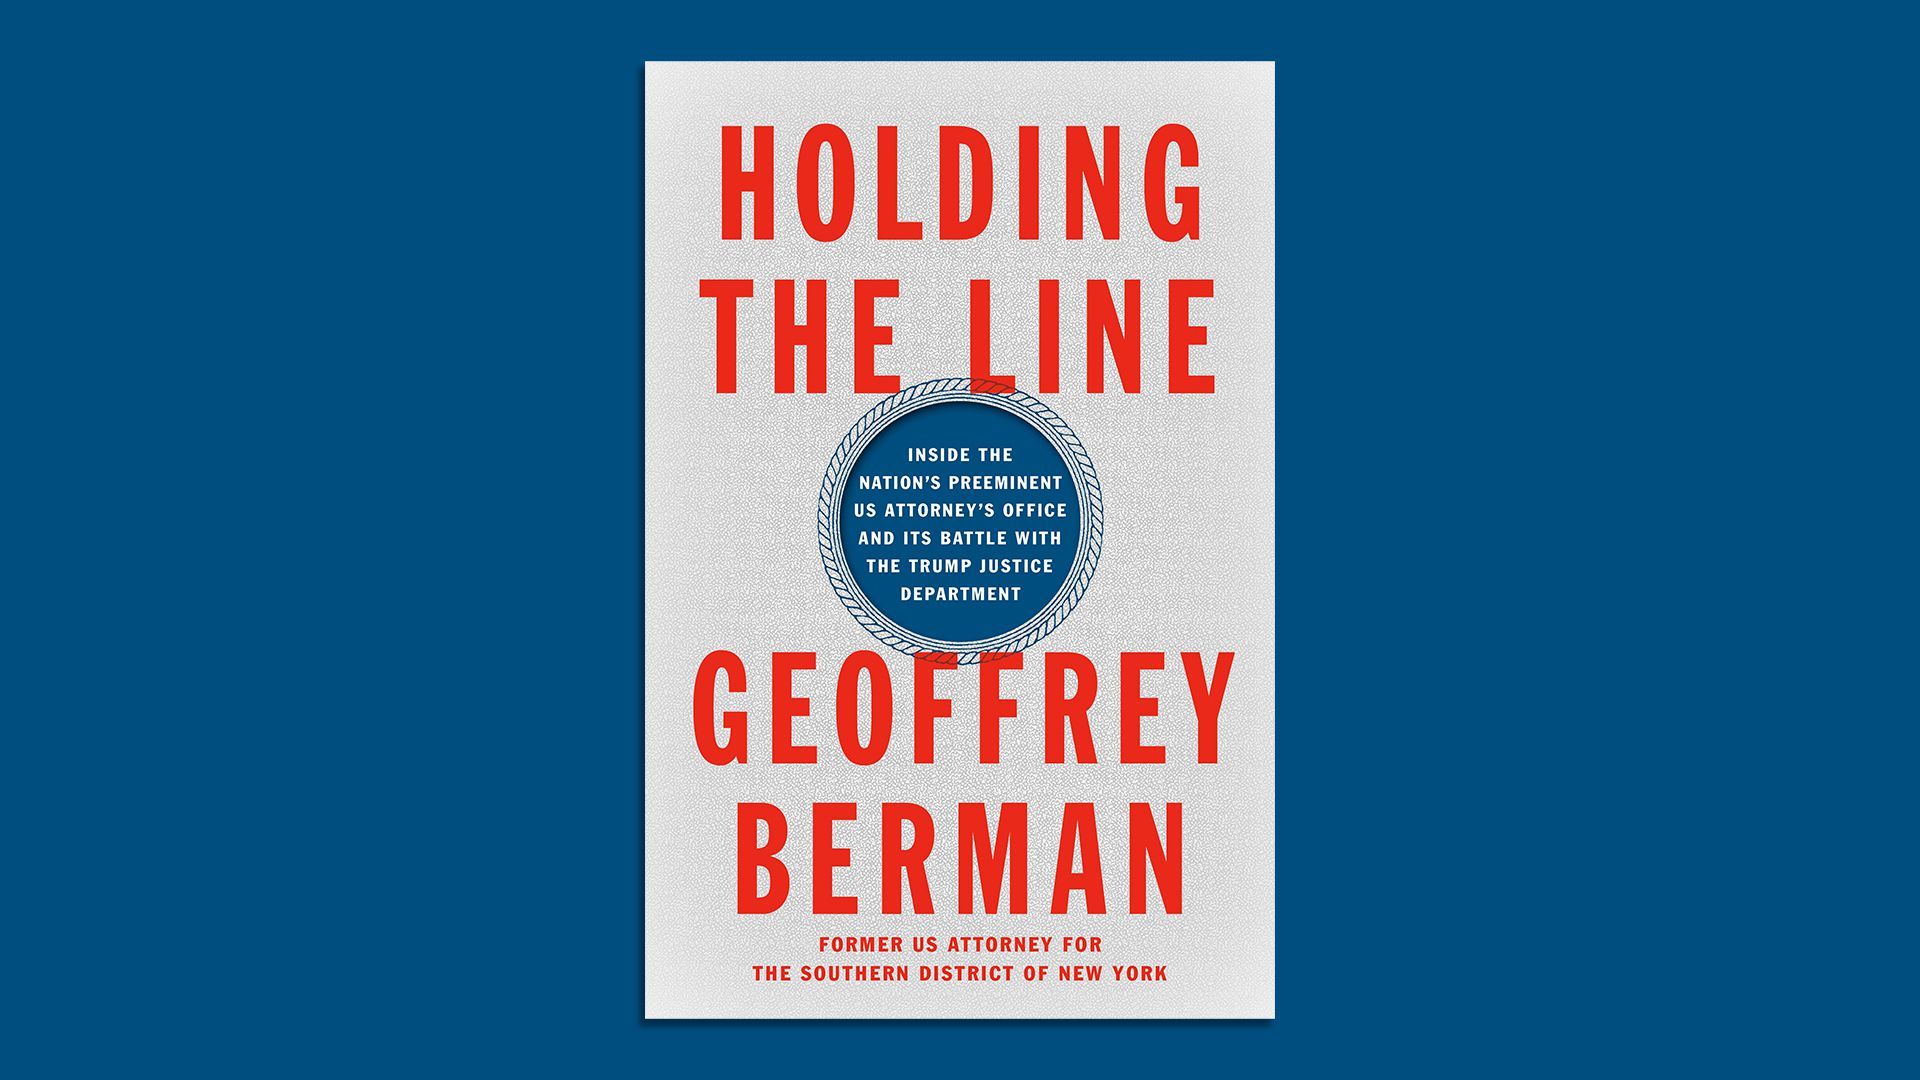 The cover of "Holding the Line" by Geoffrey Berman